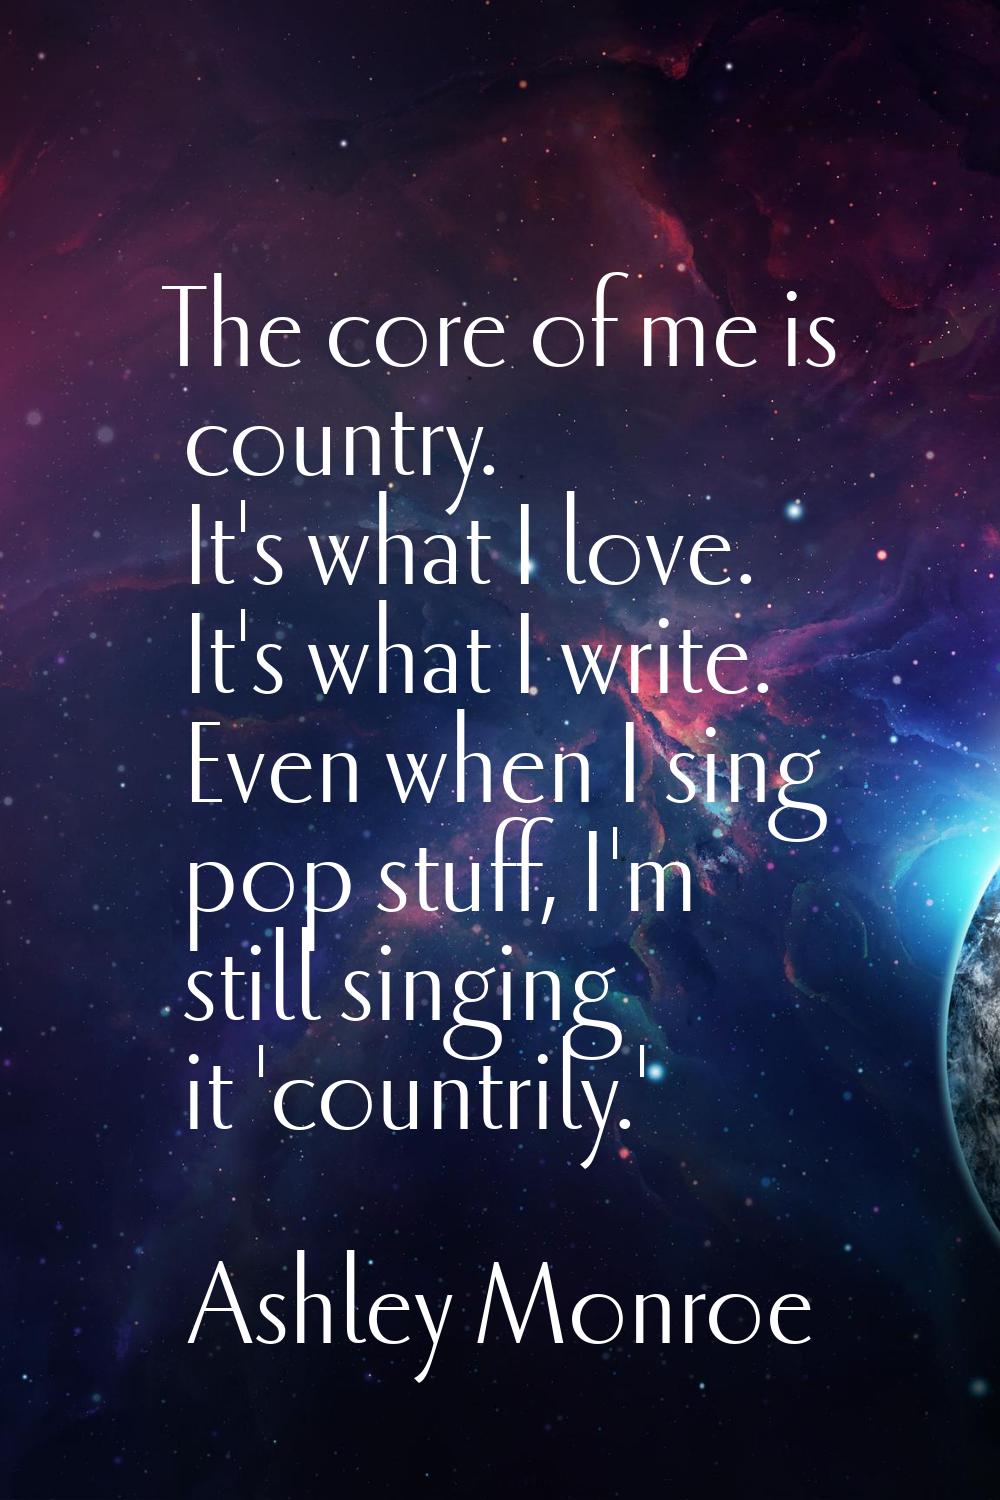 The core of me is country. It's what I love. It's what I write. Even when I sing pop stuff, I'm sti